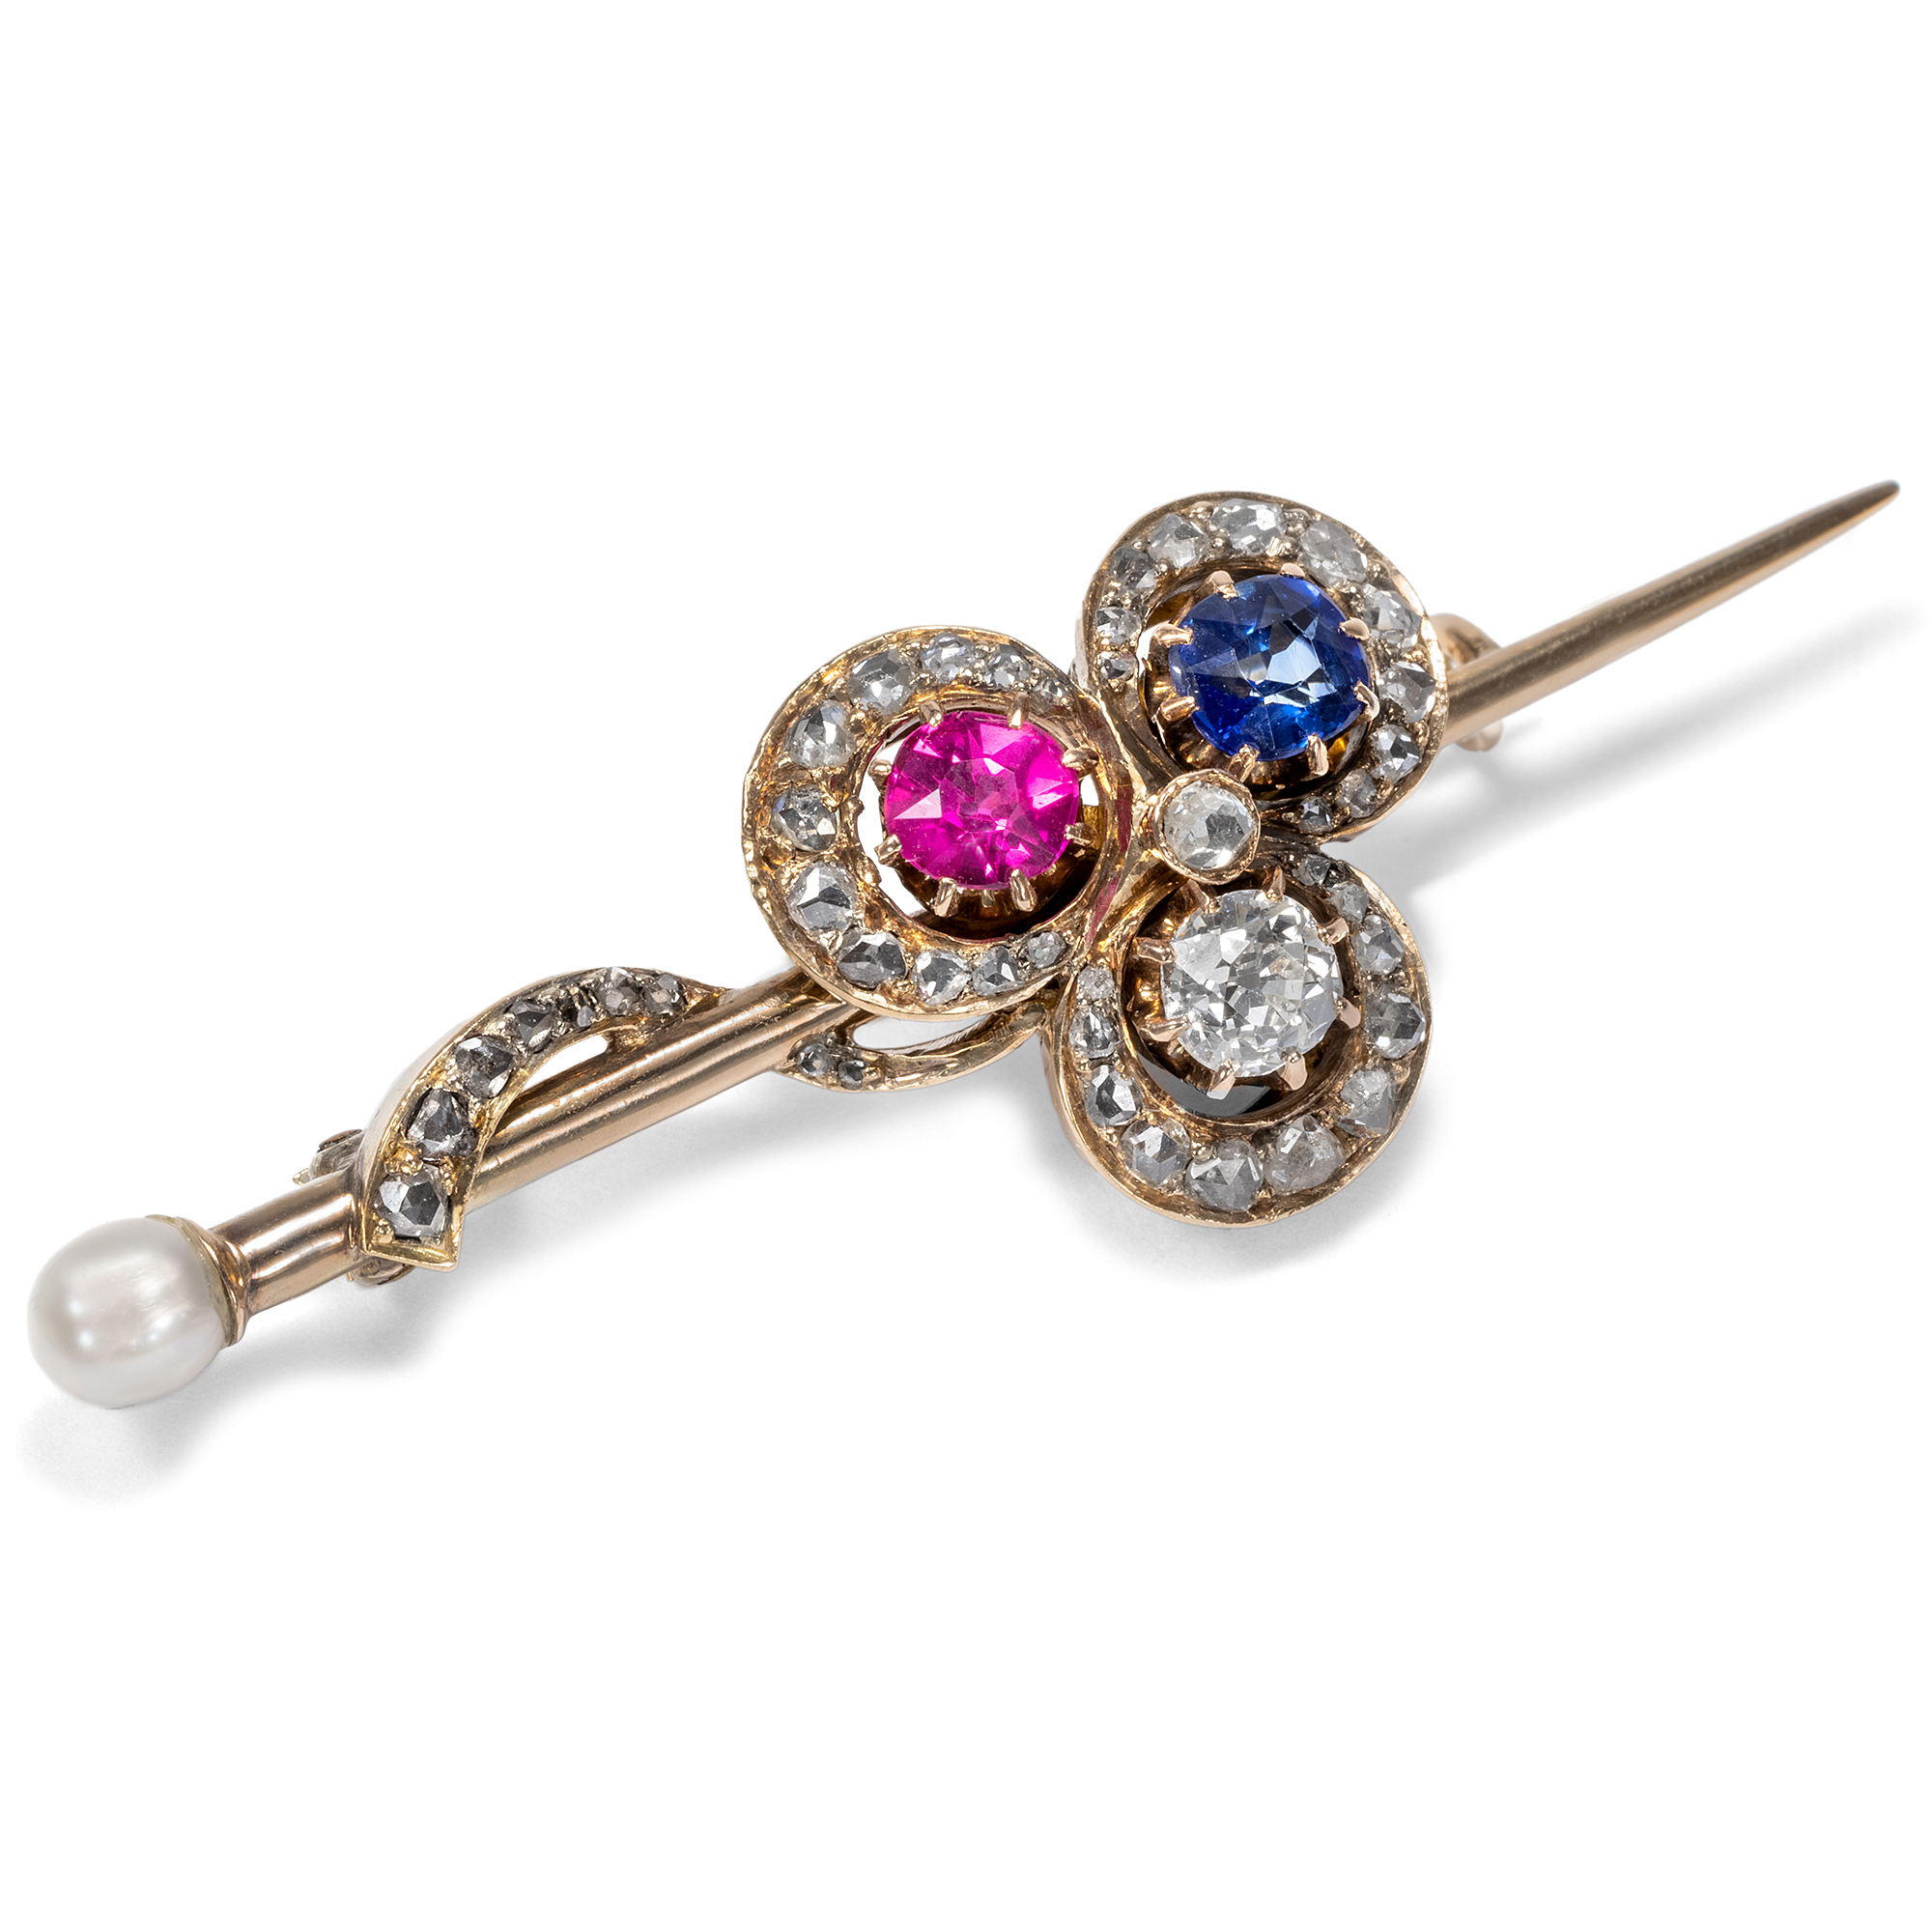 Antique Brooch With Ruby, Sapphire, Pearl & Diamonds, circa 1900